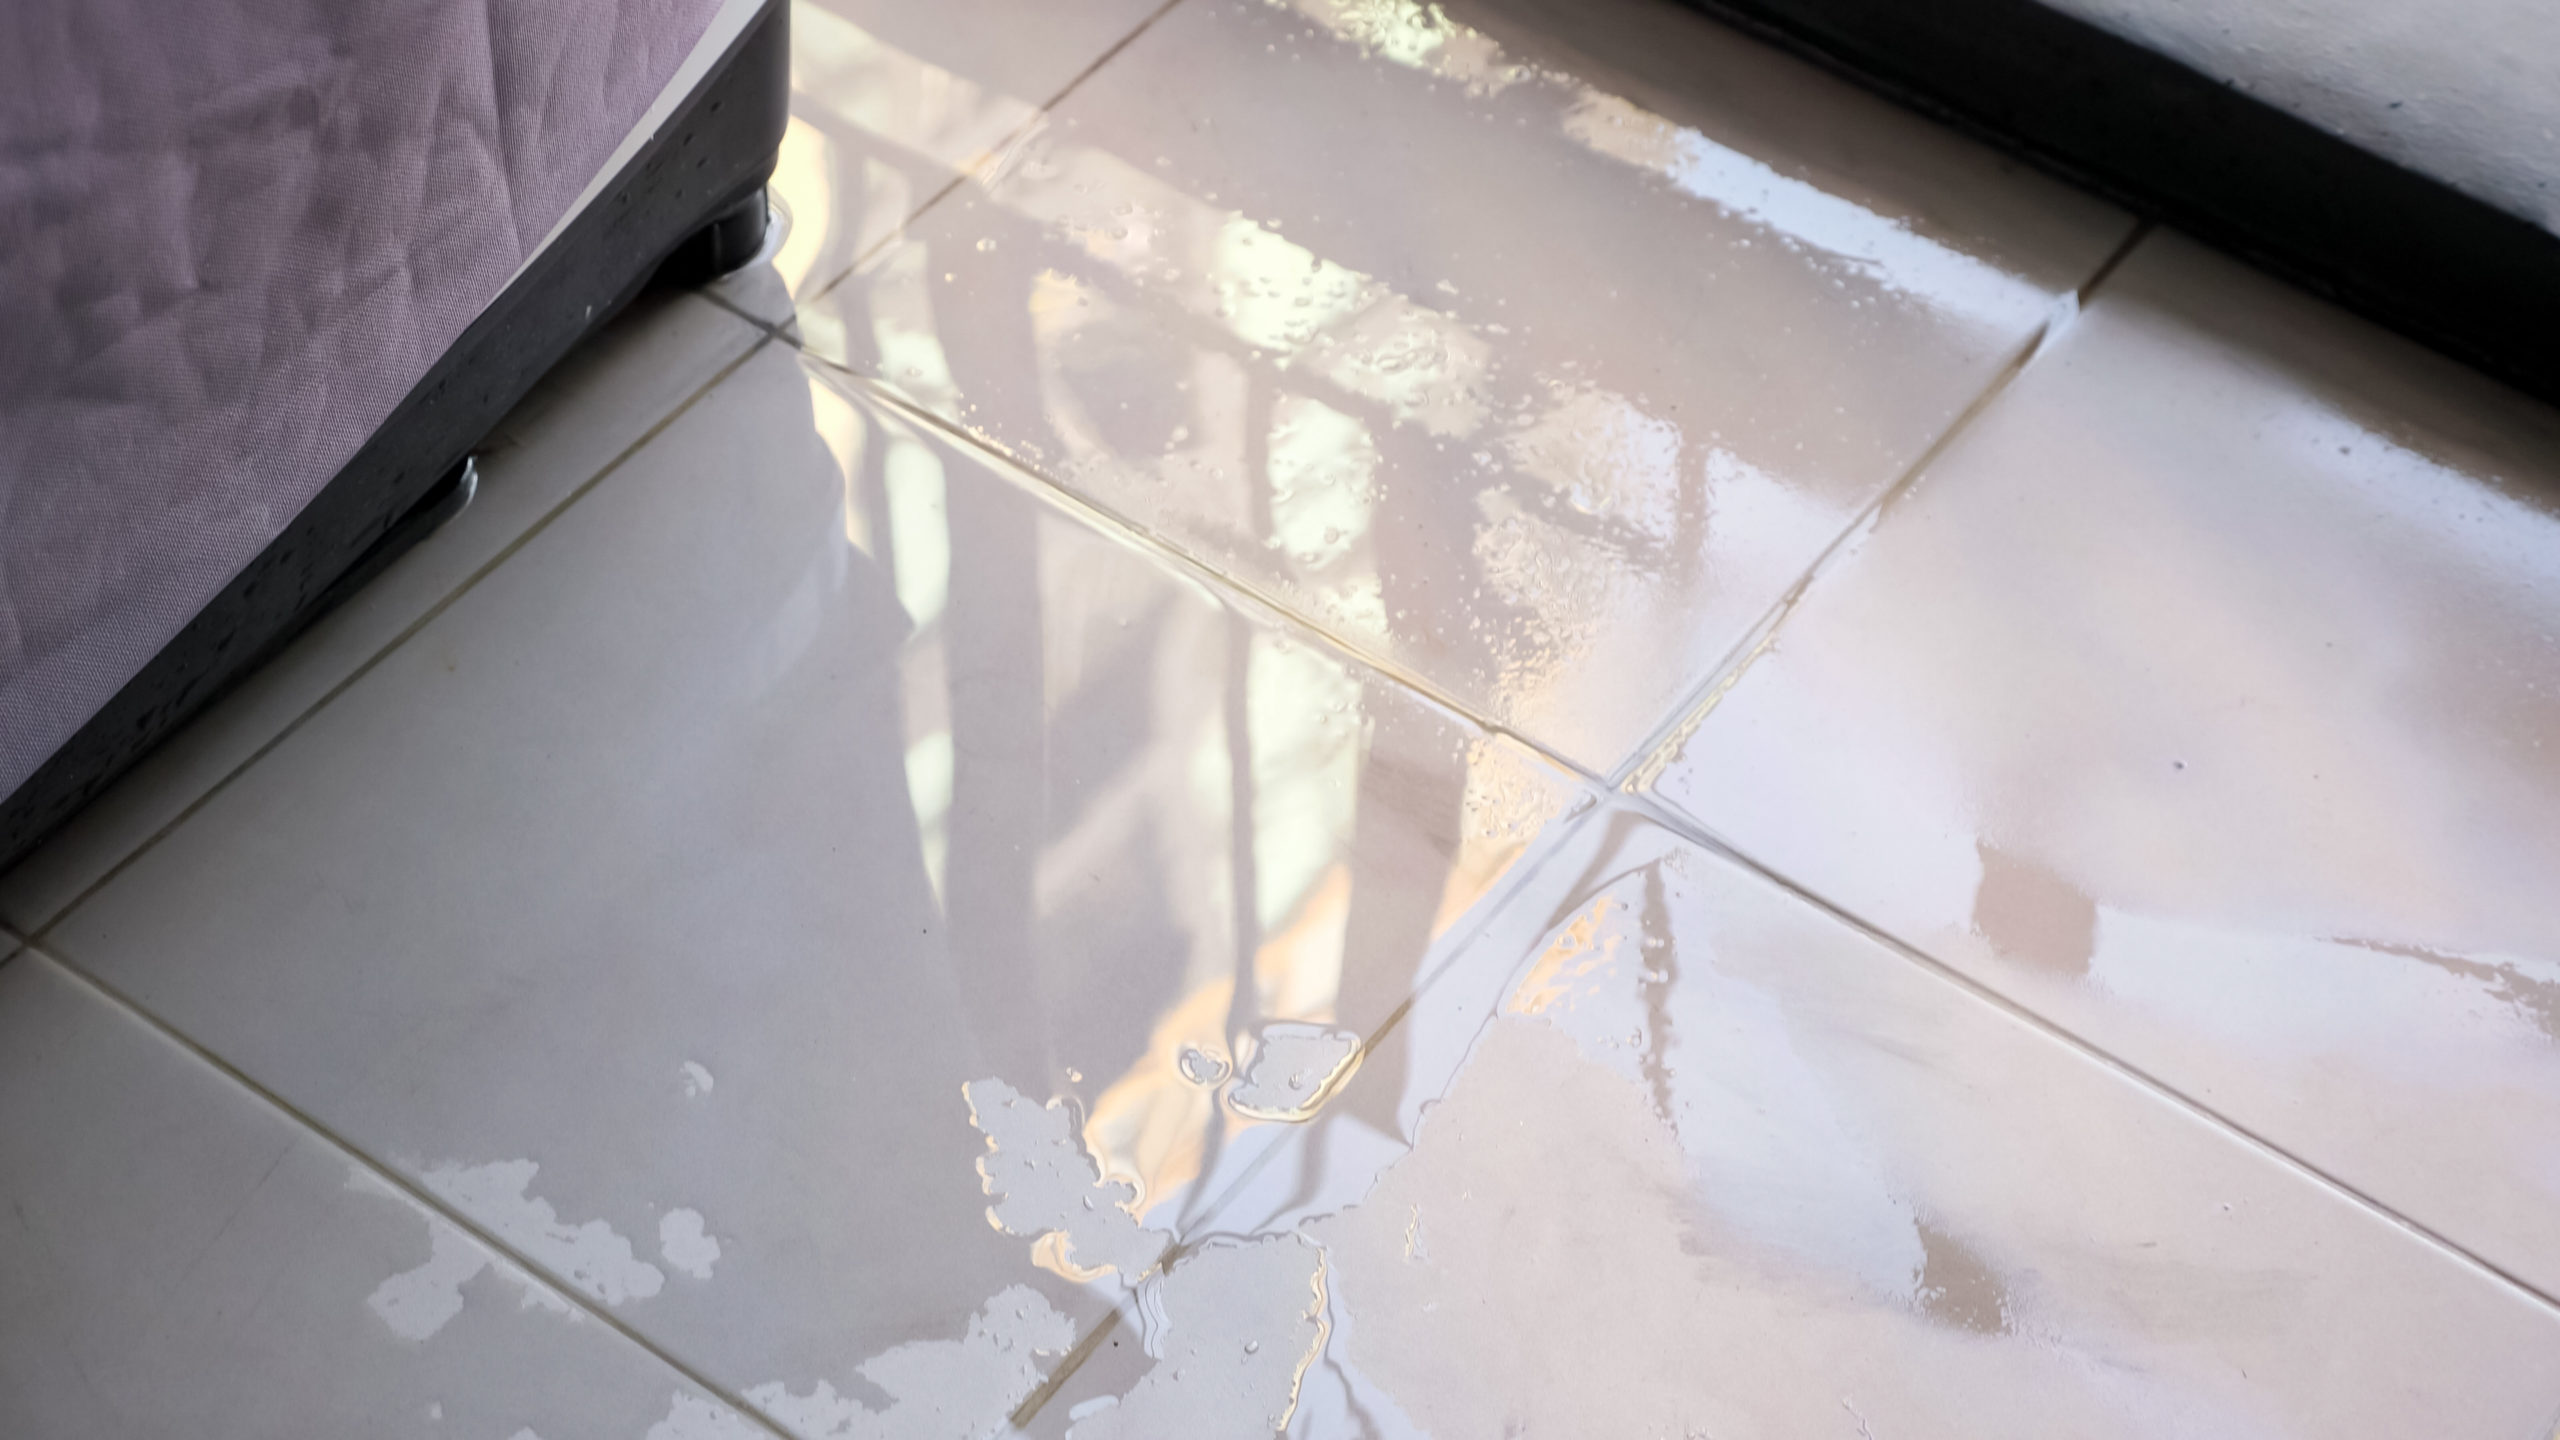 Wet Surfaces To Help Prevent Injury